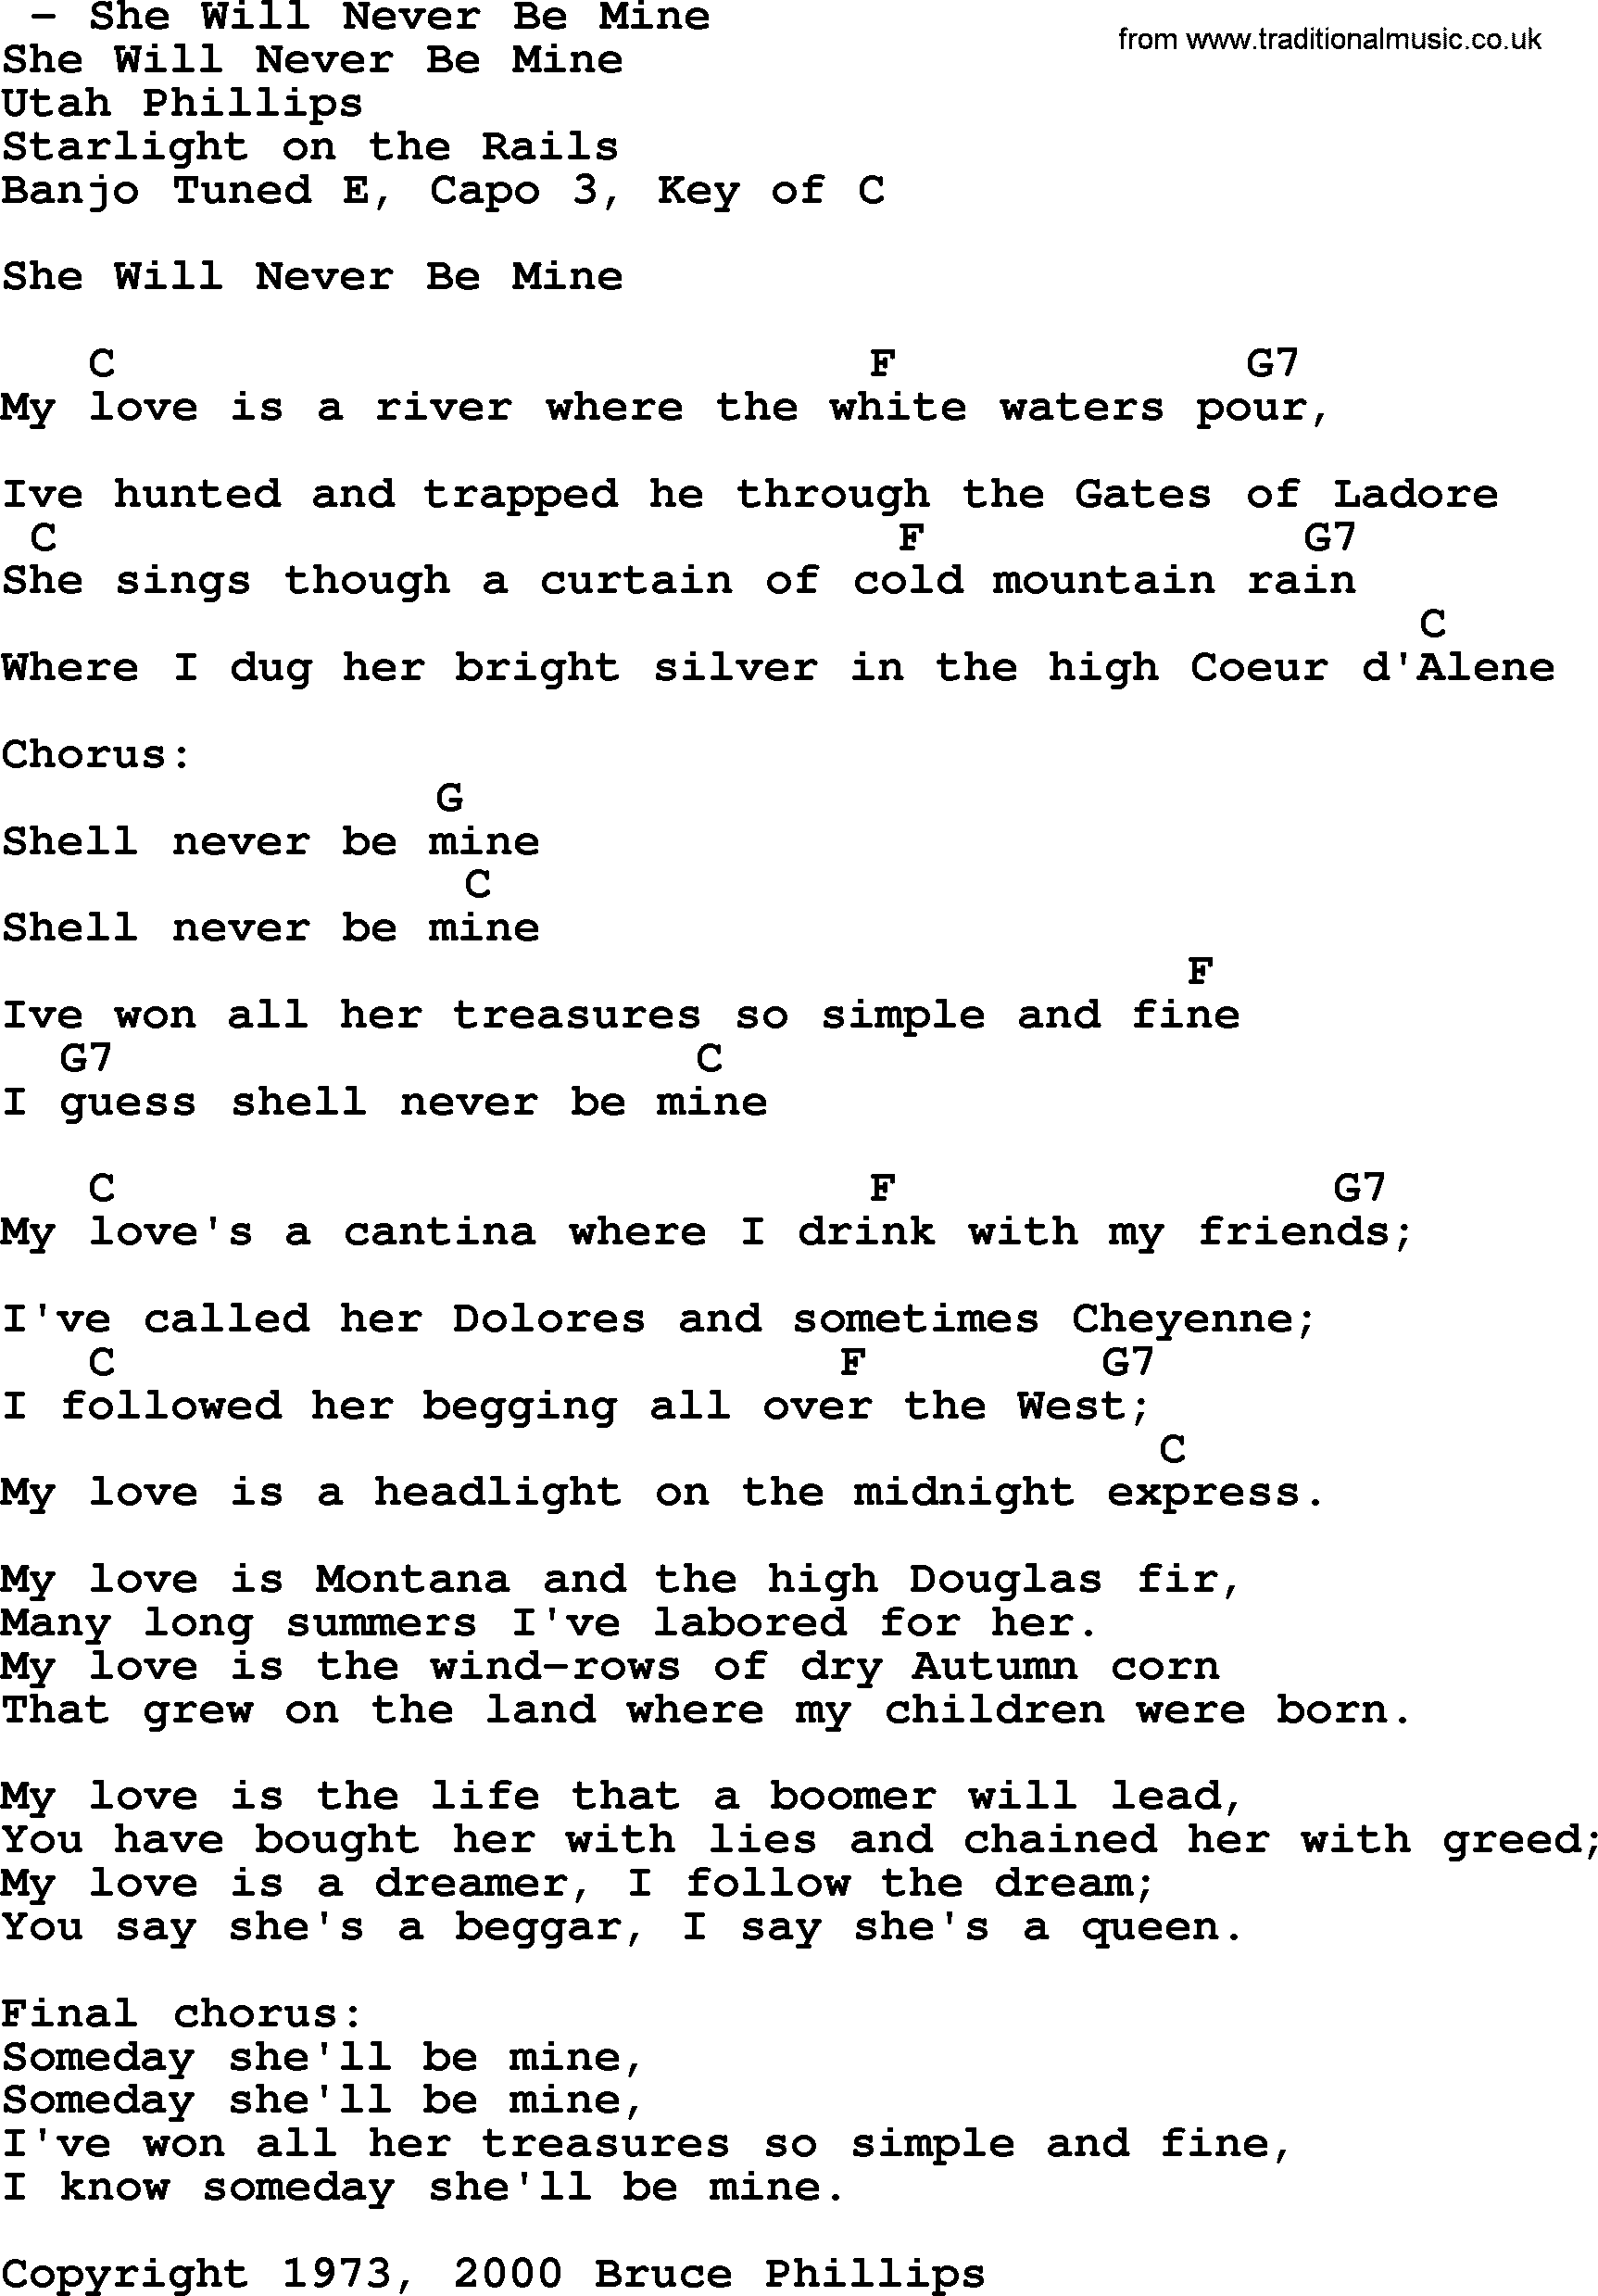 Bluegrass song: She Will Never Be Mine, lyrics and chords